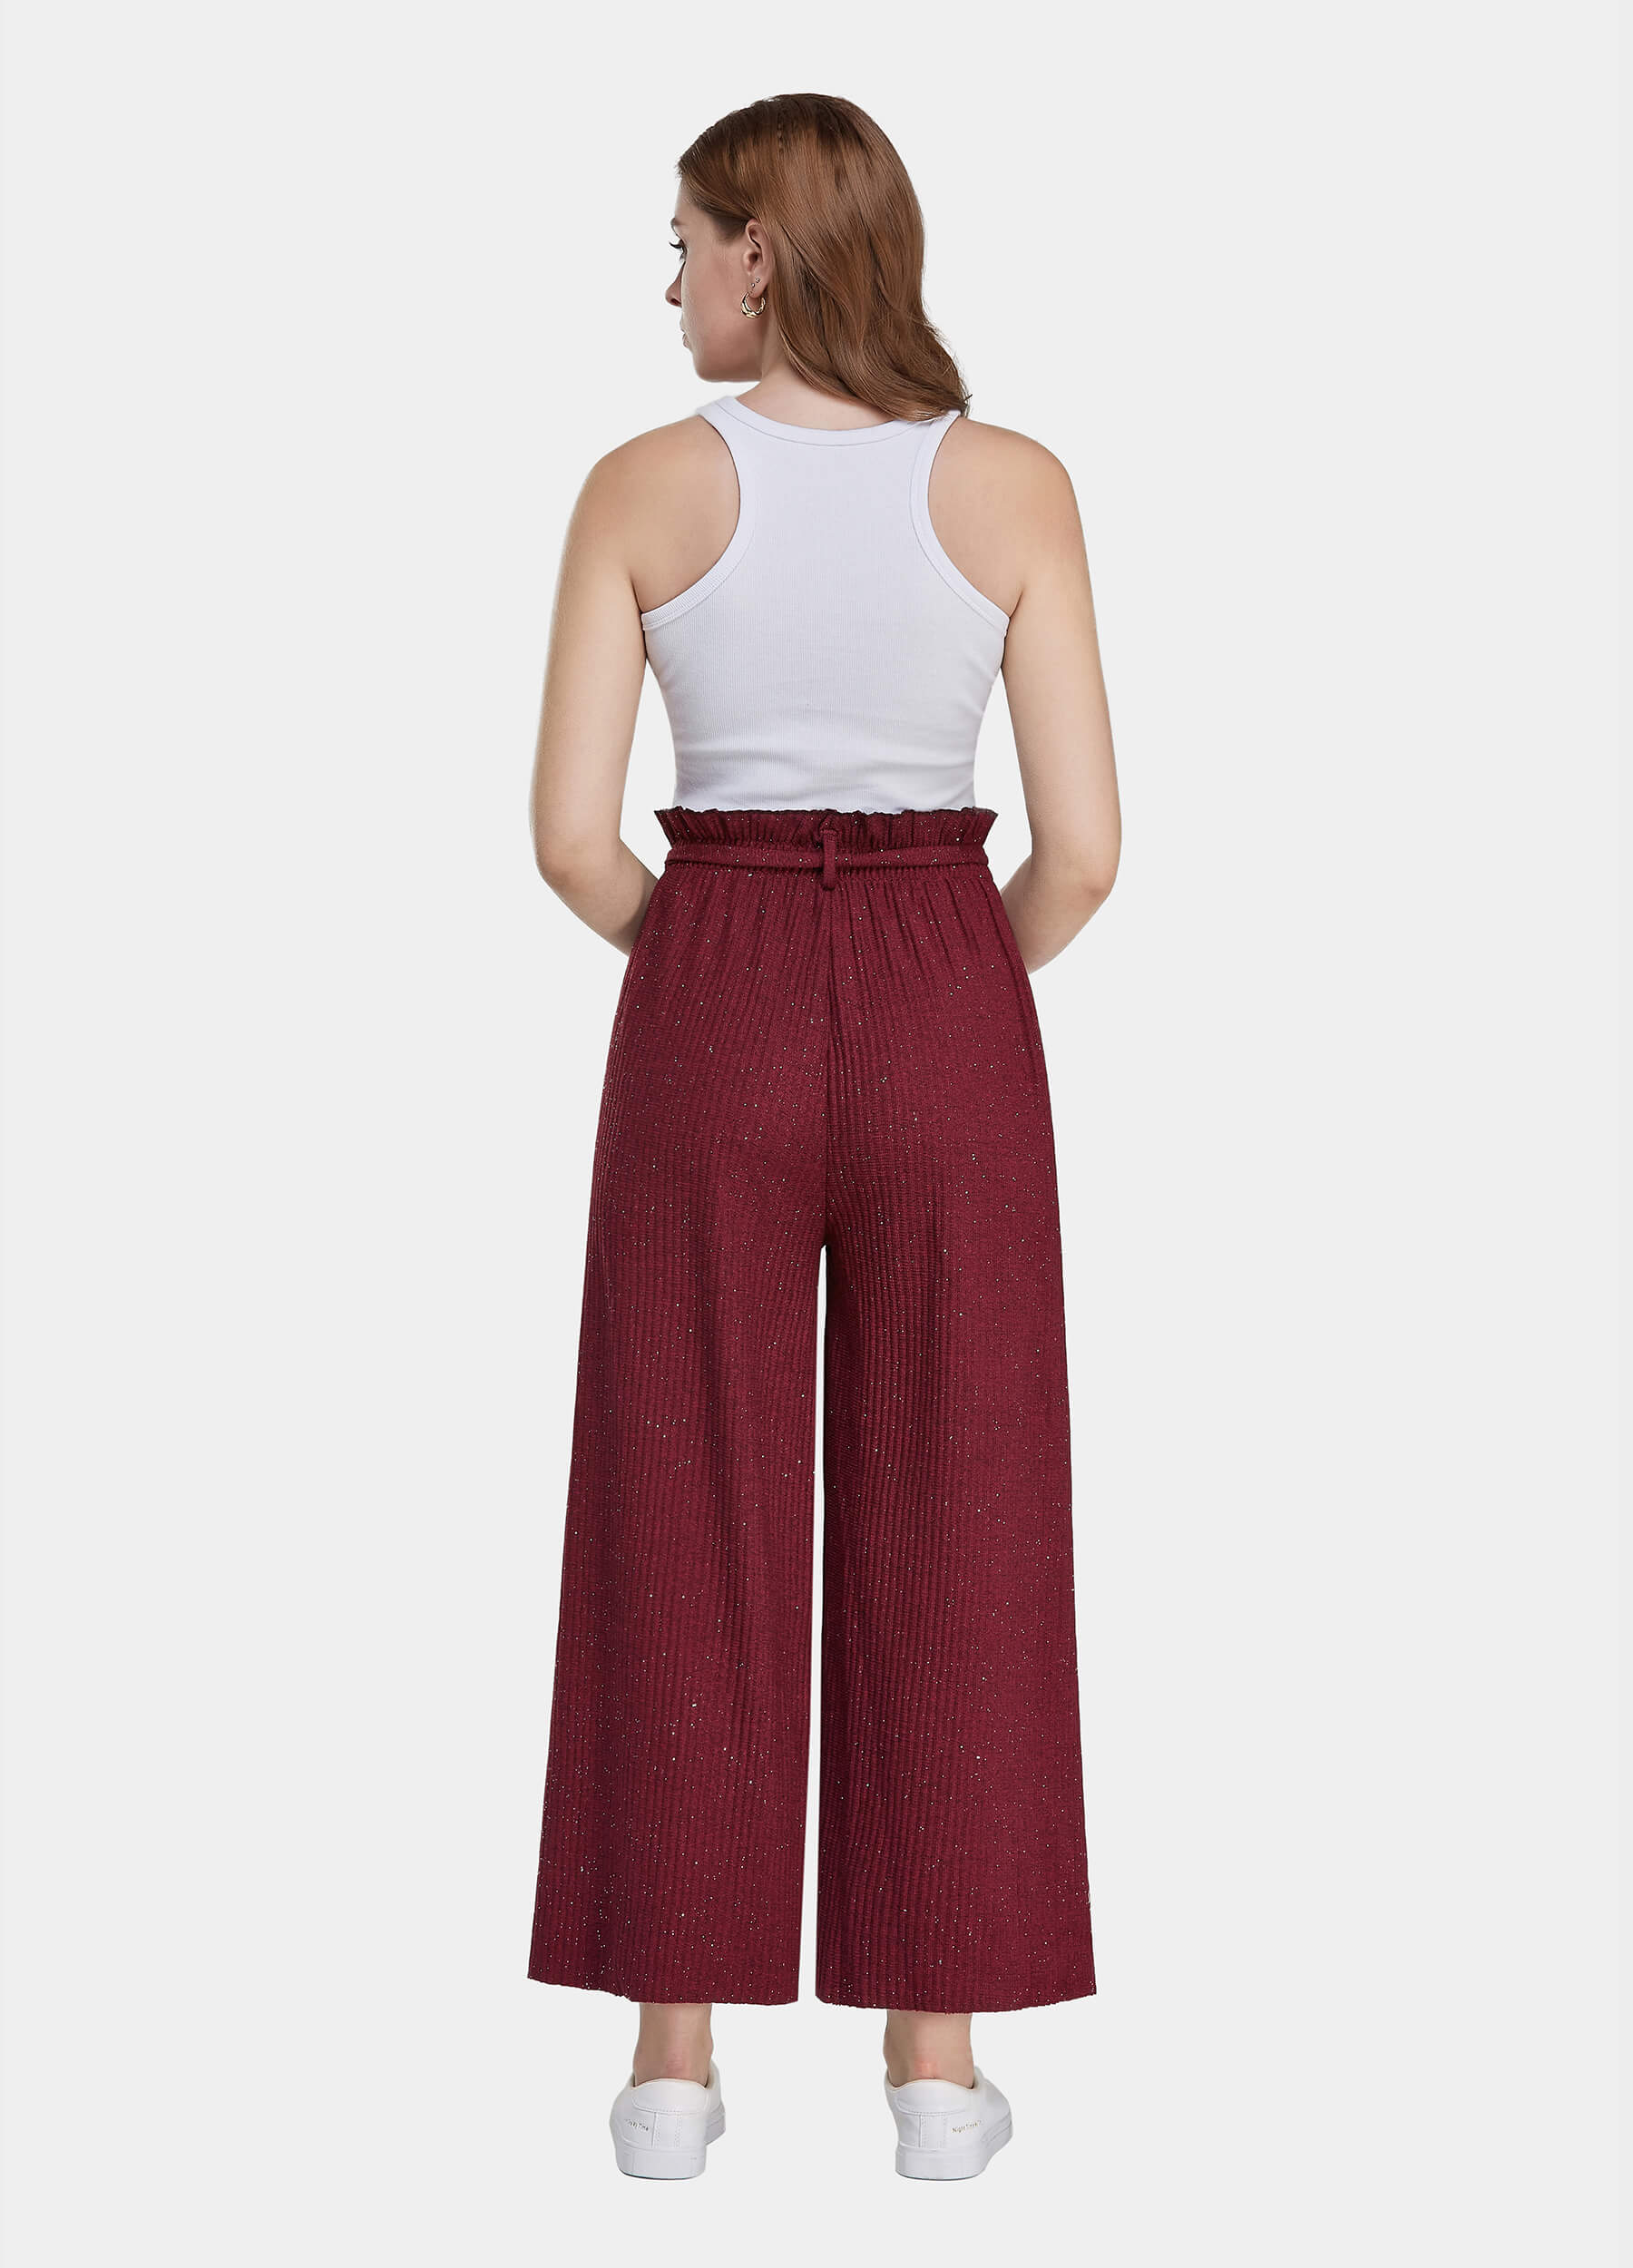 Women's Ruffle Trims Belted Comfort Wide Leg Trousers-Red back view